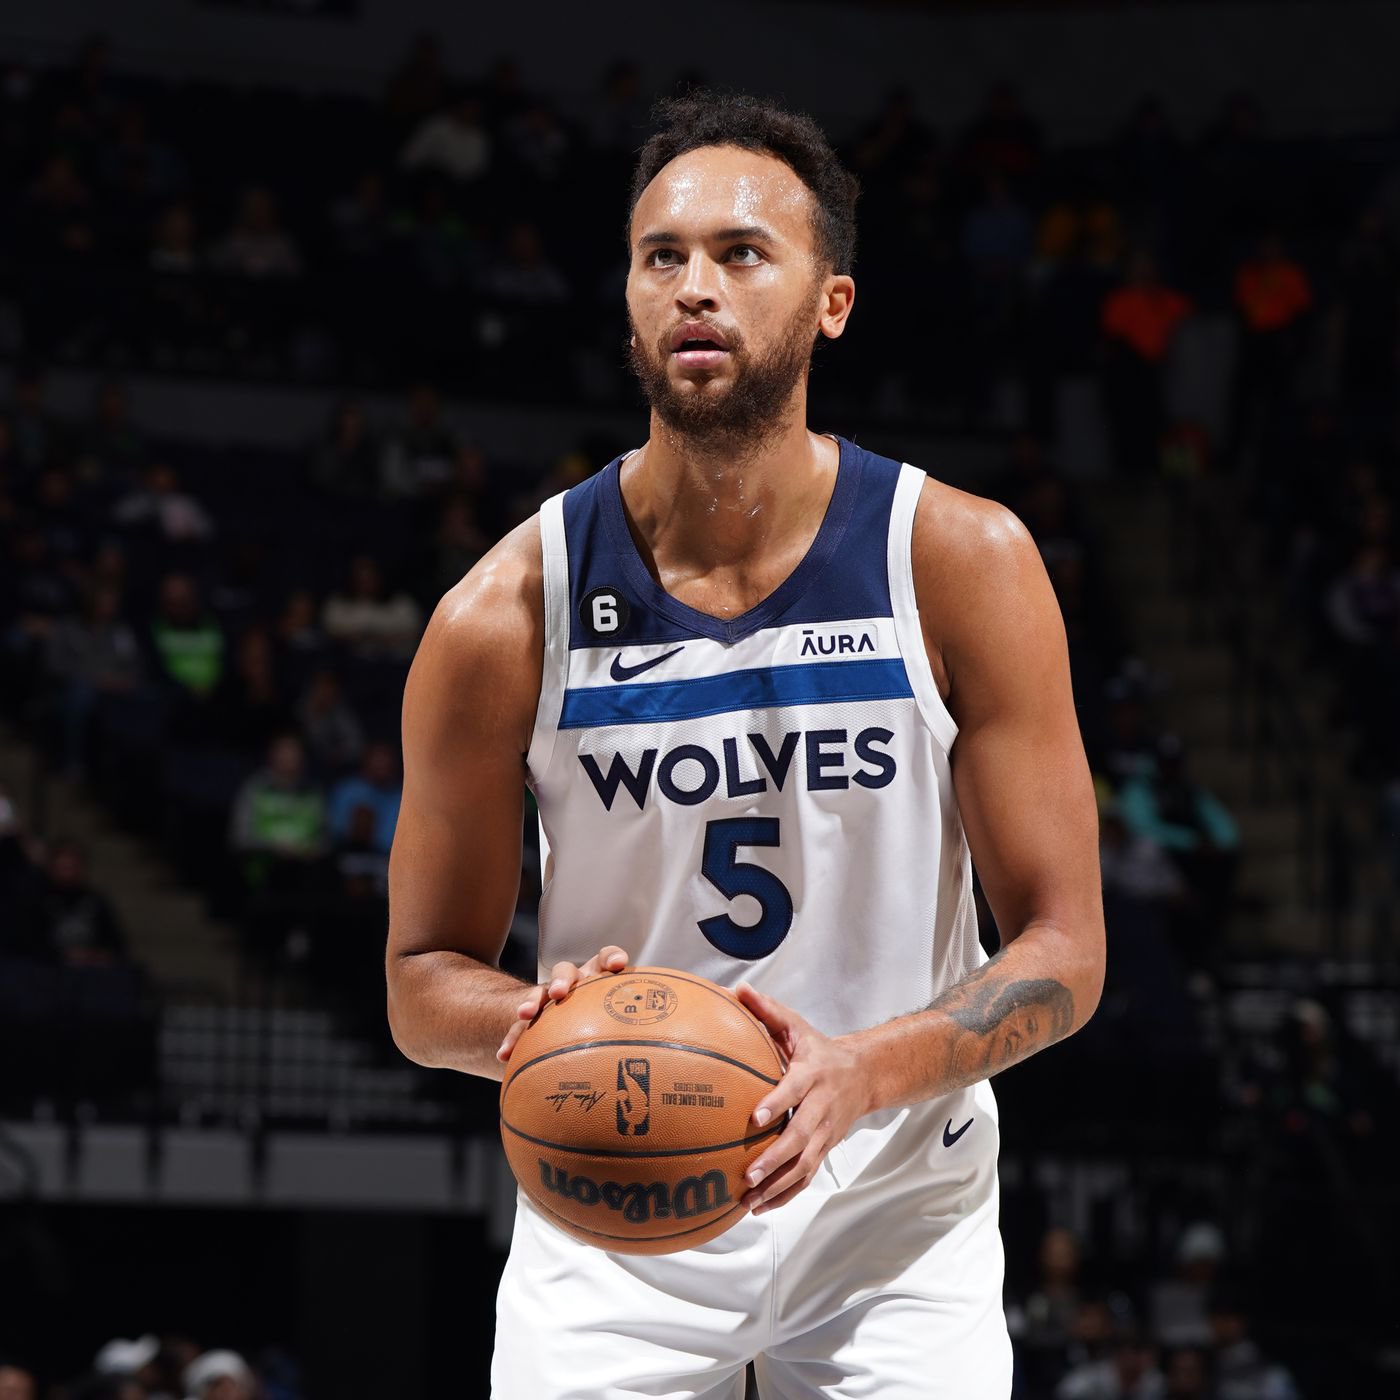 NBA players competing in the 2023 FIBA World Cup: Kyle Anderson